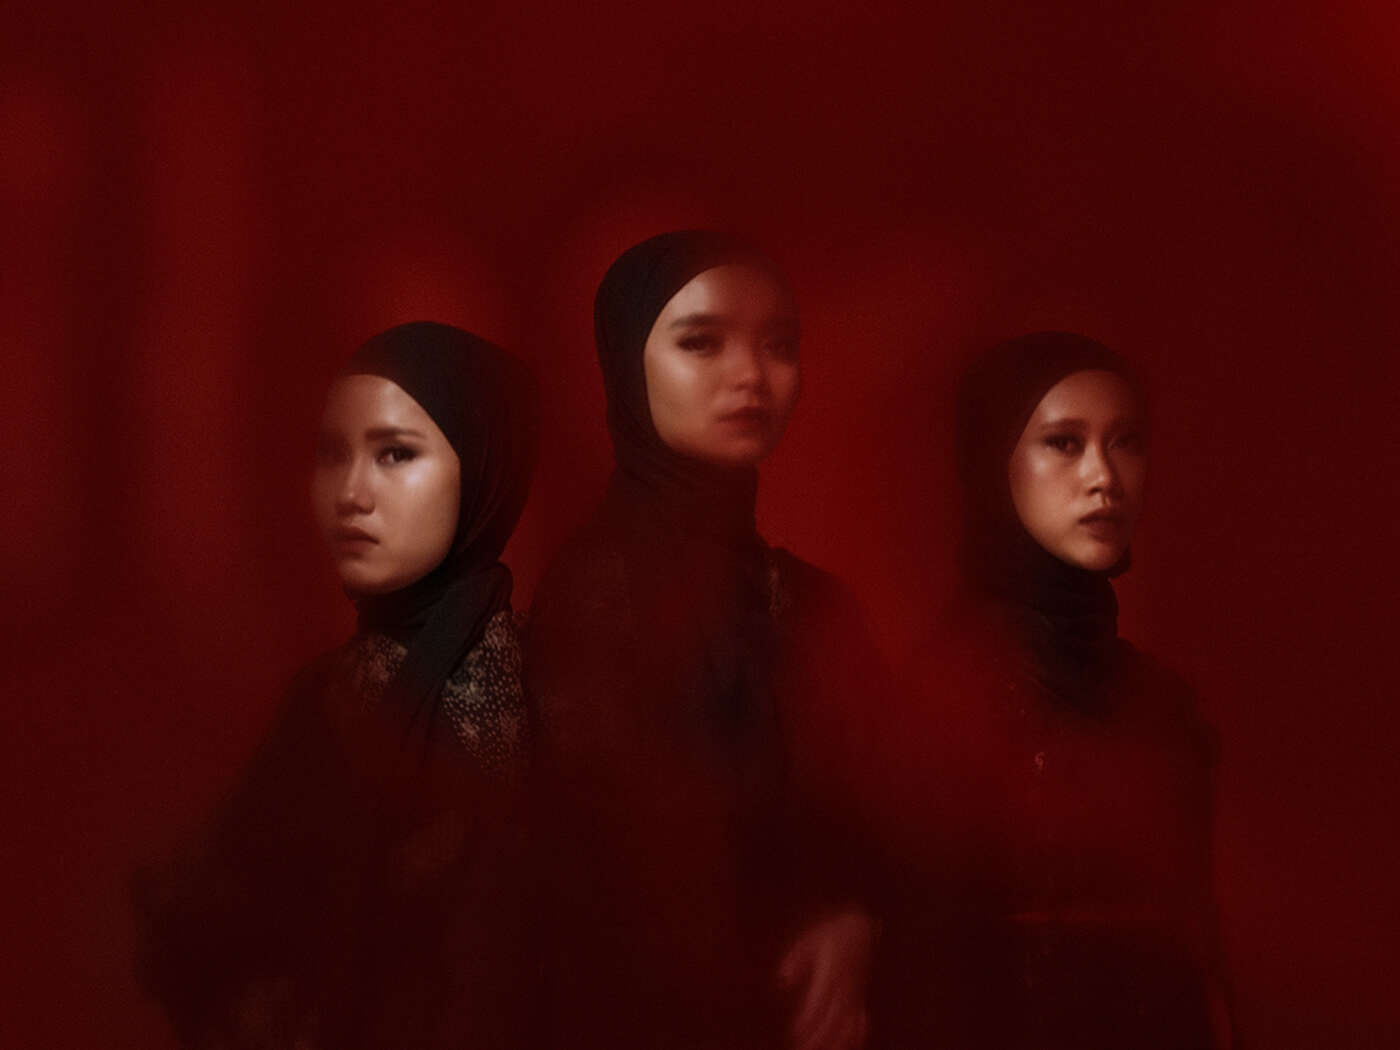 Siti, Marsya and Widi of Voice of Baceprot by Davy Linggar